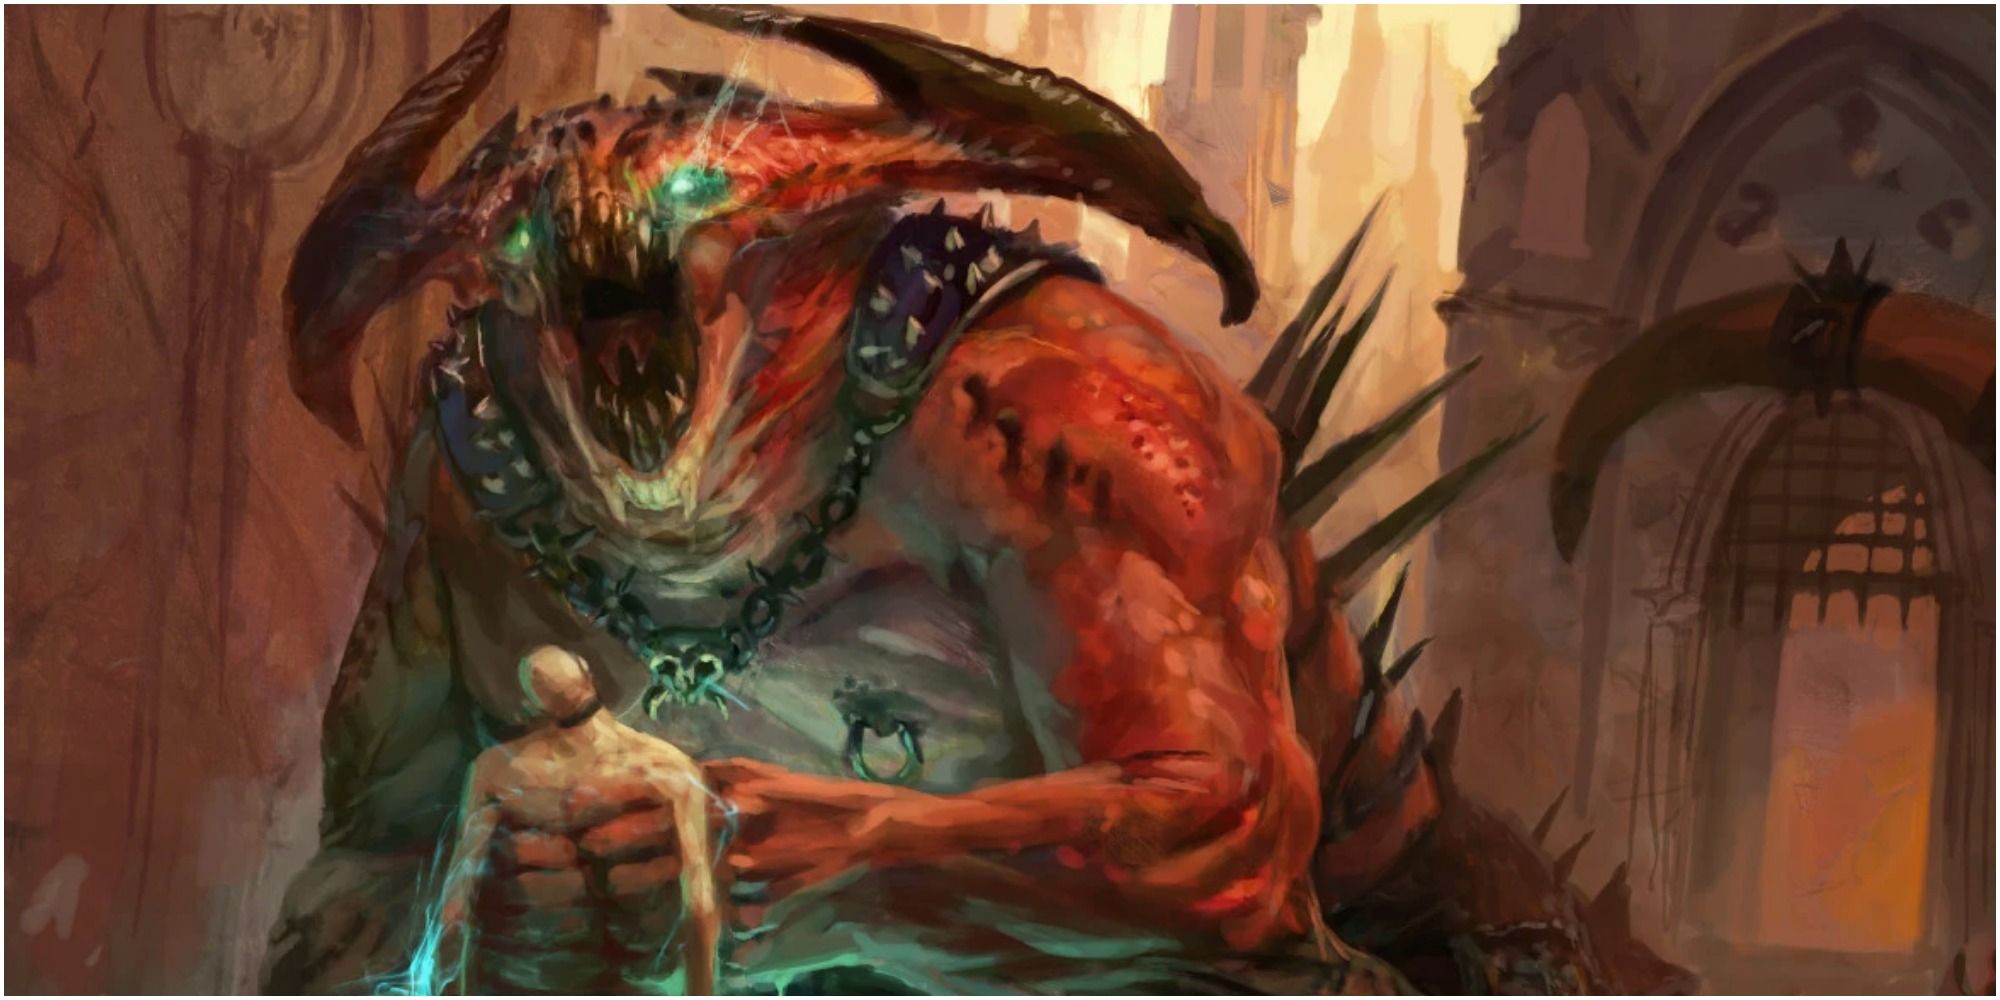 Sire of Sanity Magic The Gathering card art